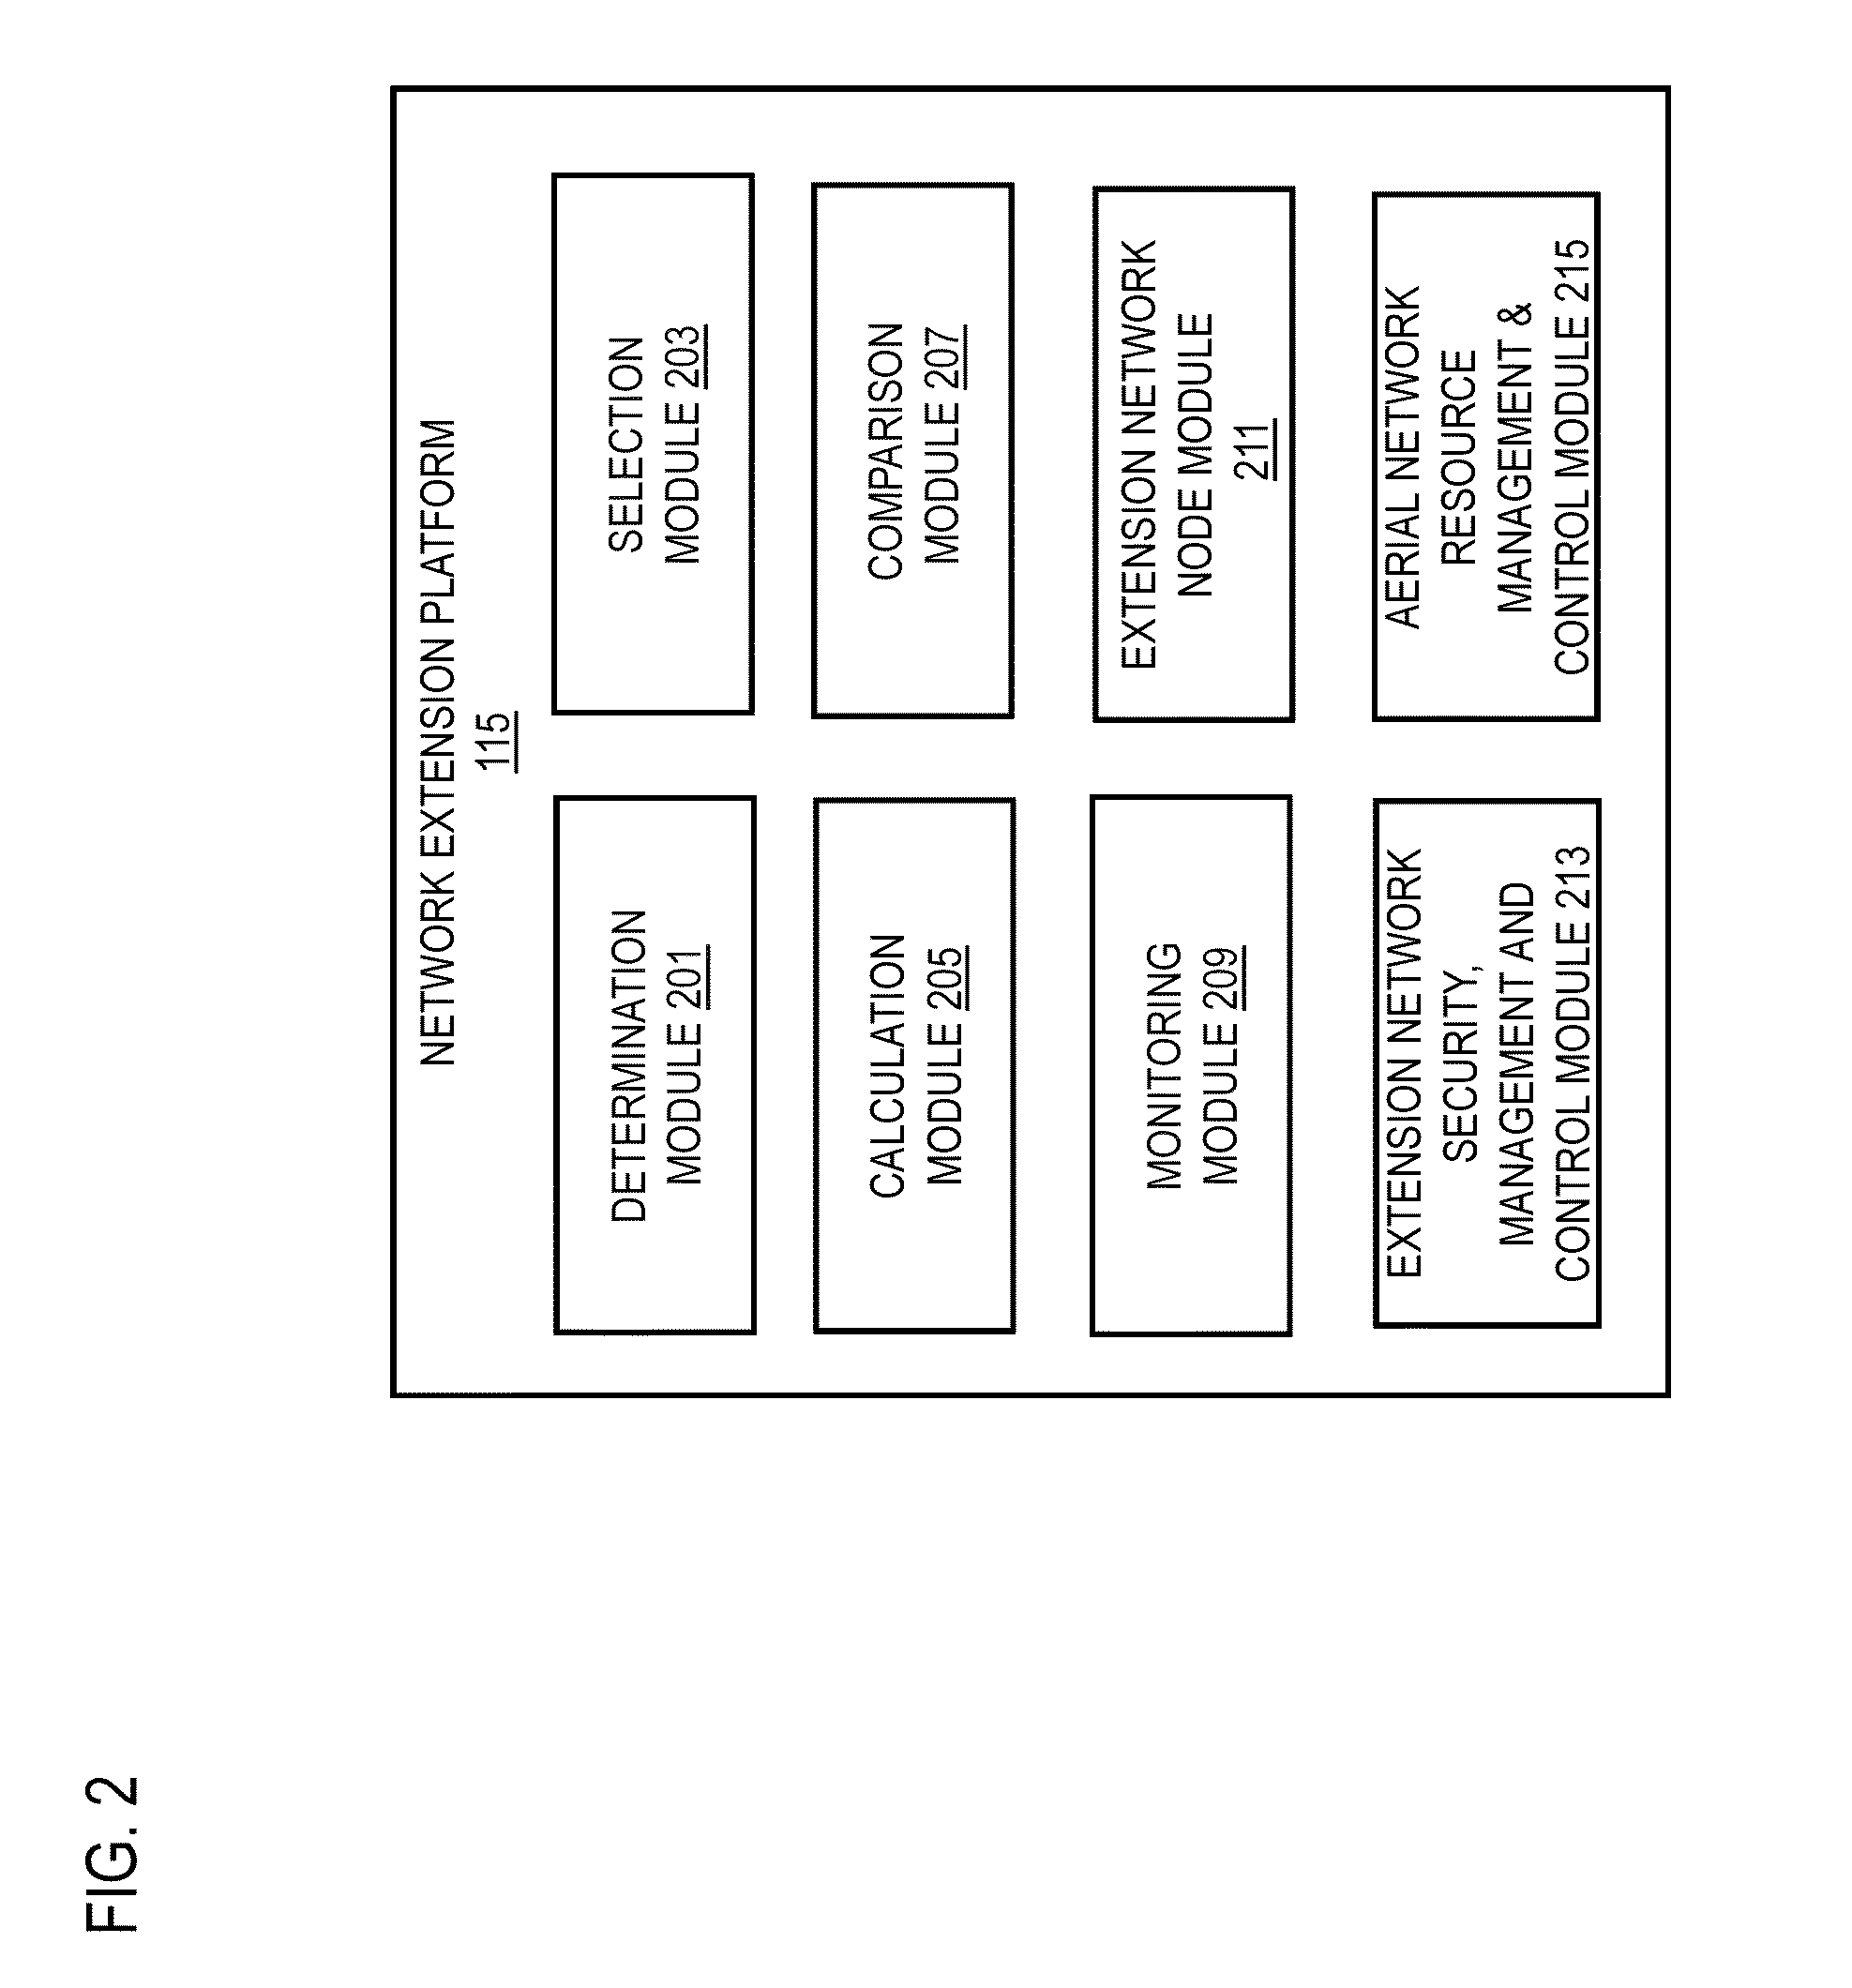 System and method for providing extension of network coverage